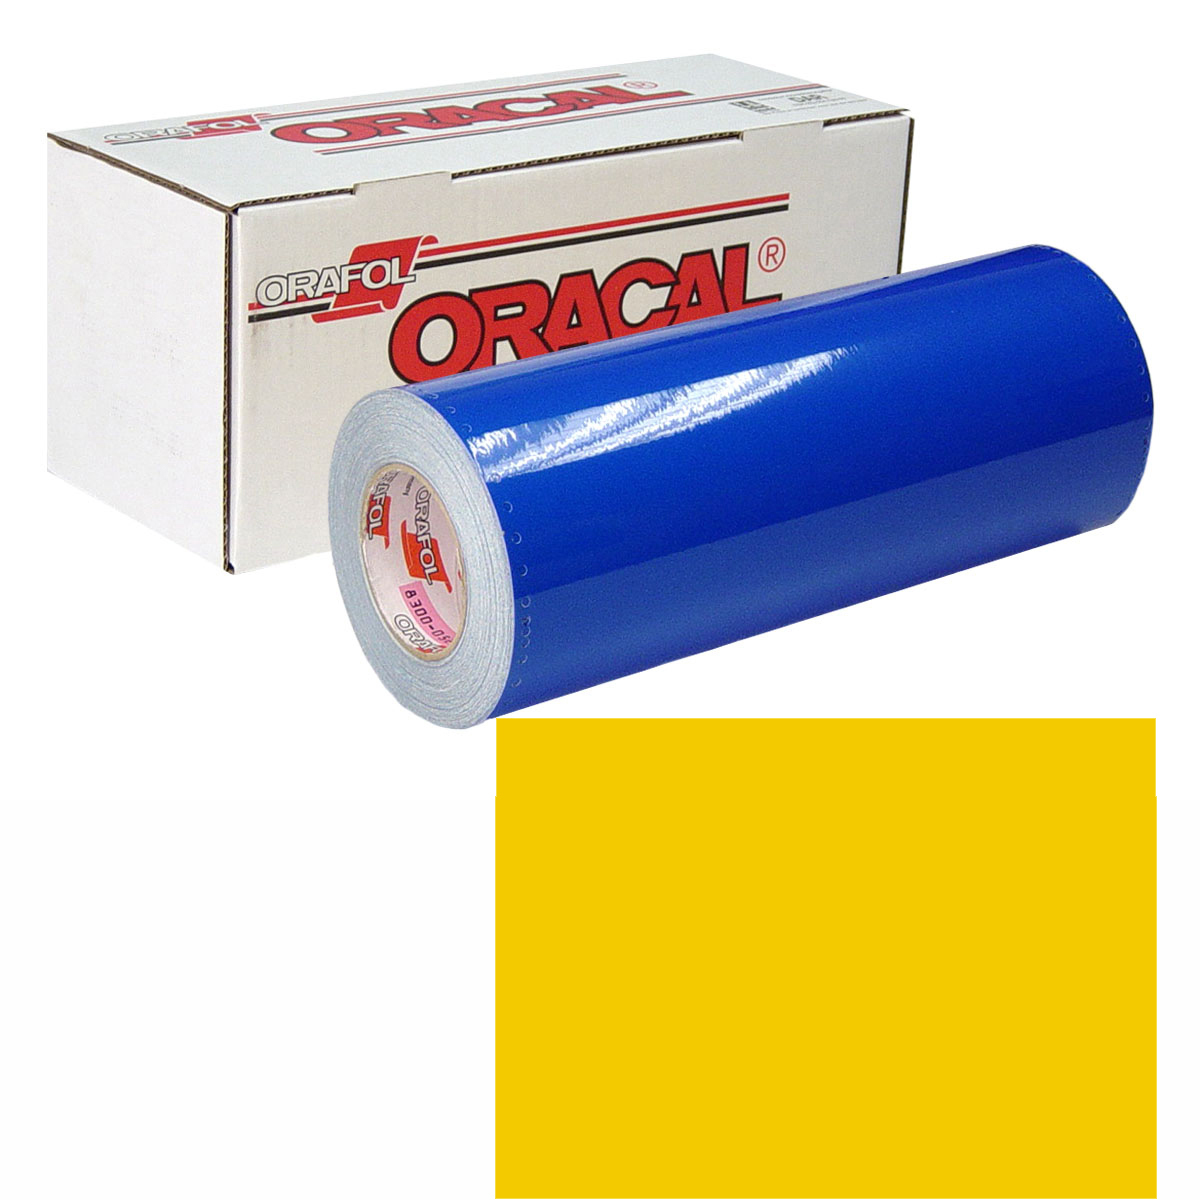 ORACAL 631 15in X 50yd 022 Light Yellow